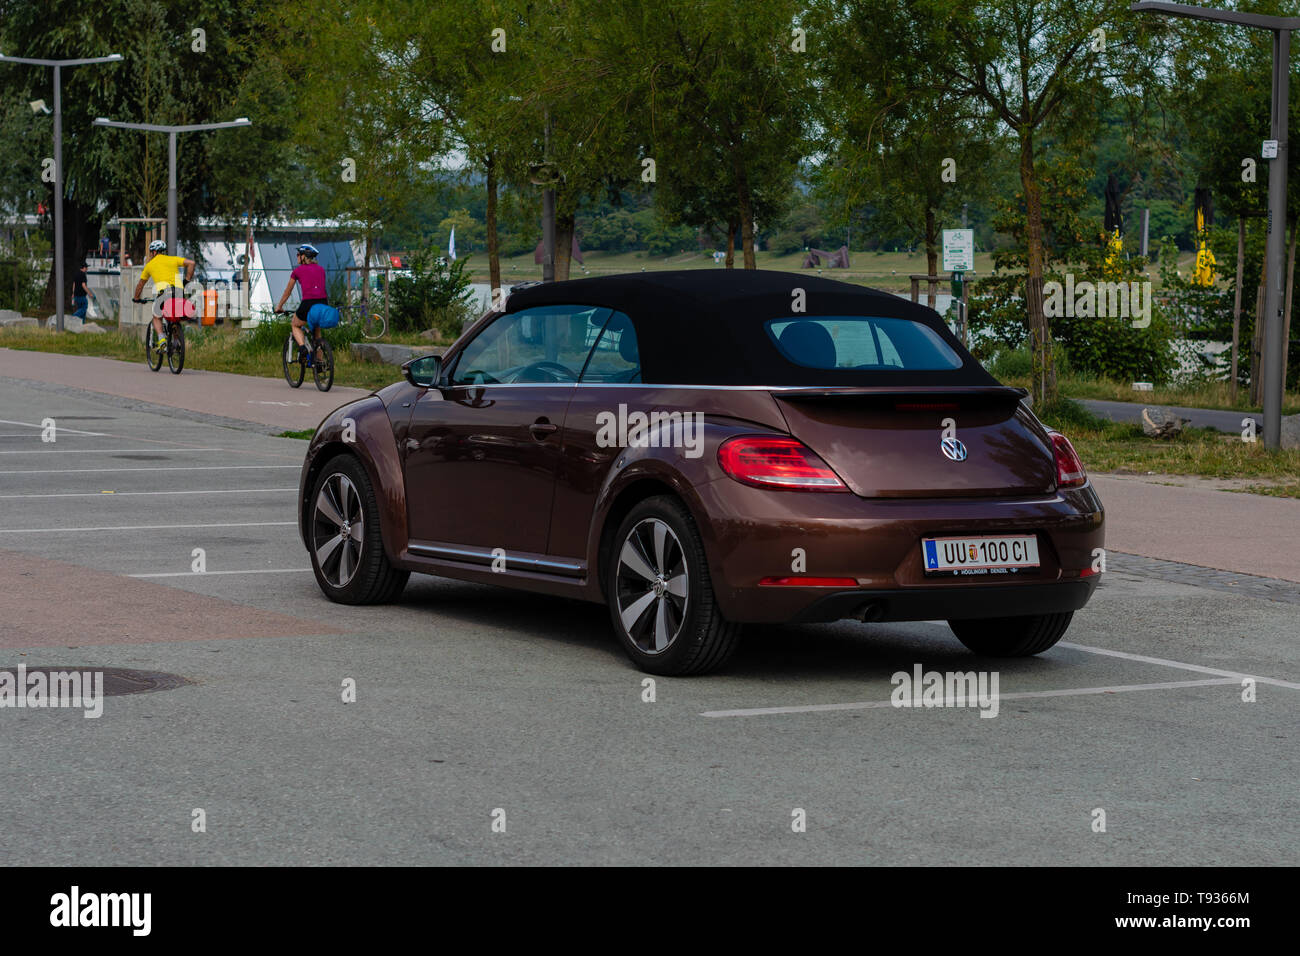 LINZ, AUSTRIA - AUGUST 02, 2018:   Side View Of Brown Volkswagen New Beetle Cabriolet Car Parked In Street. Stock Photo